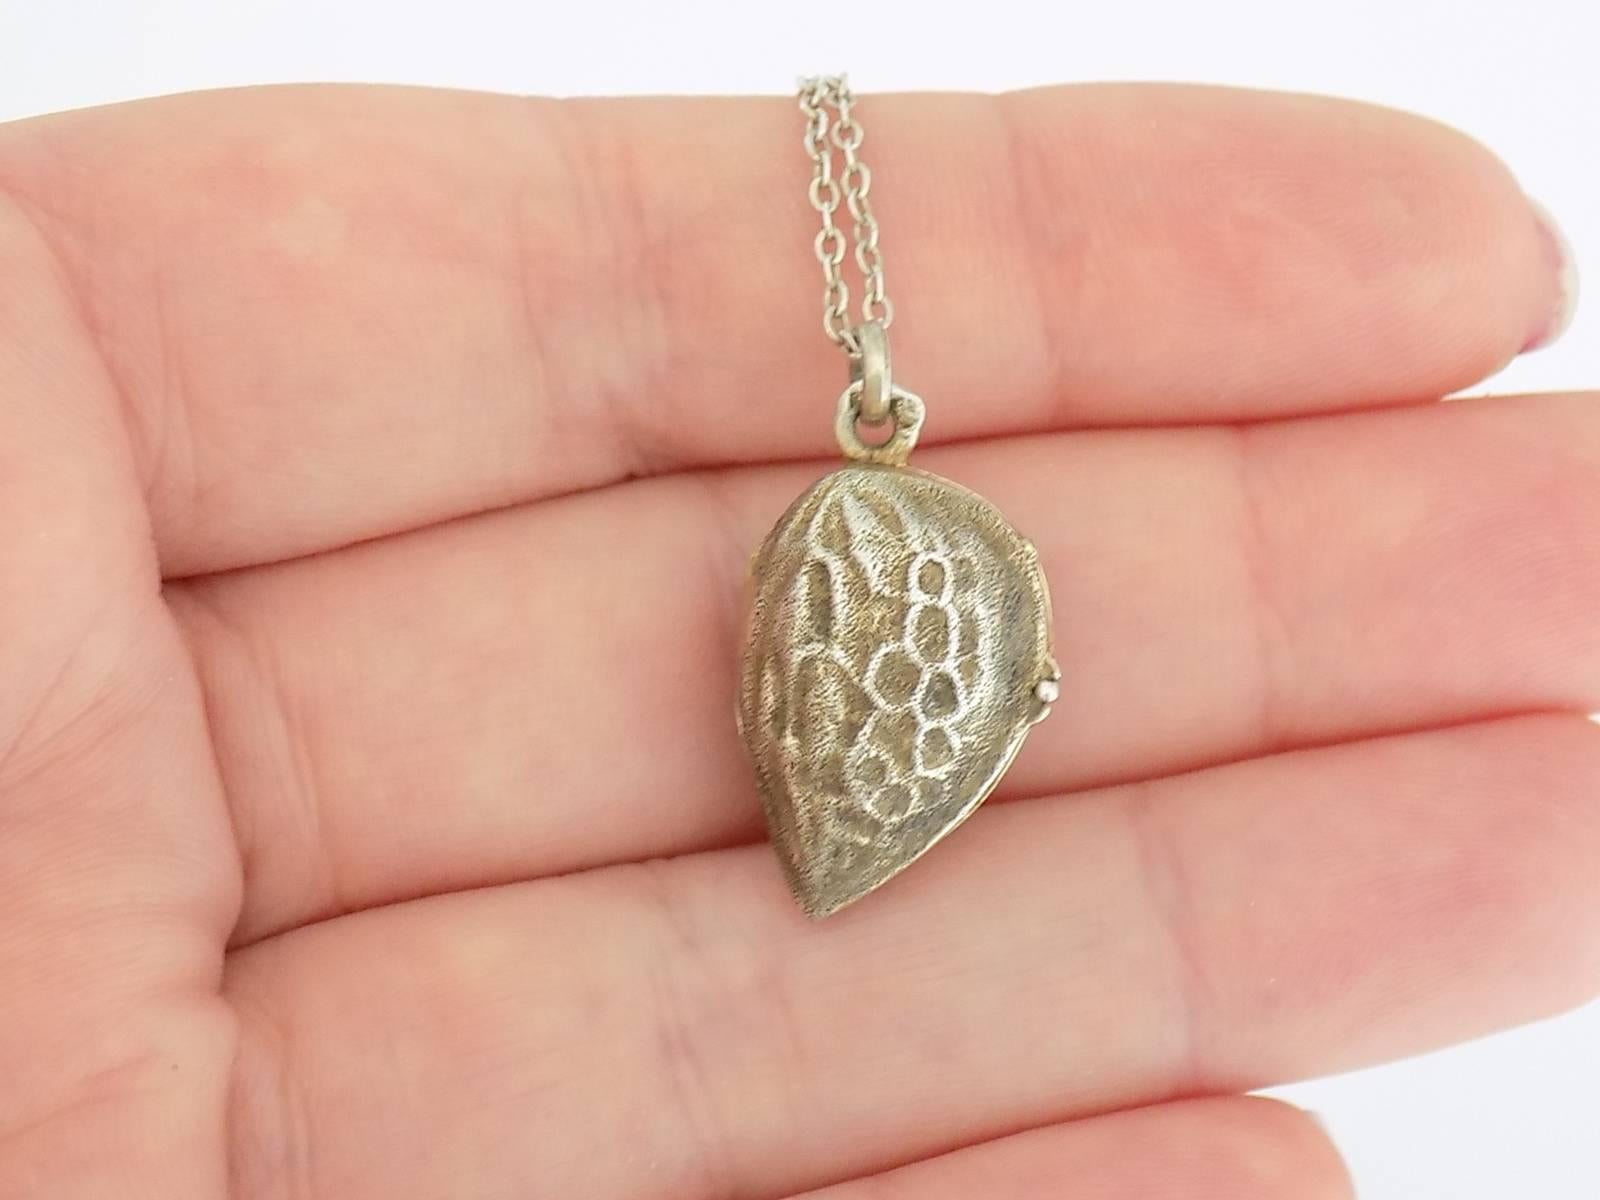 Victorian Silver Almond Locket Pendant on Silver Chain Necklace 2